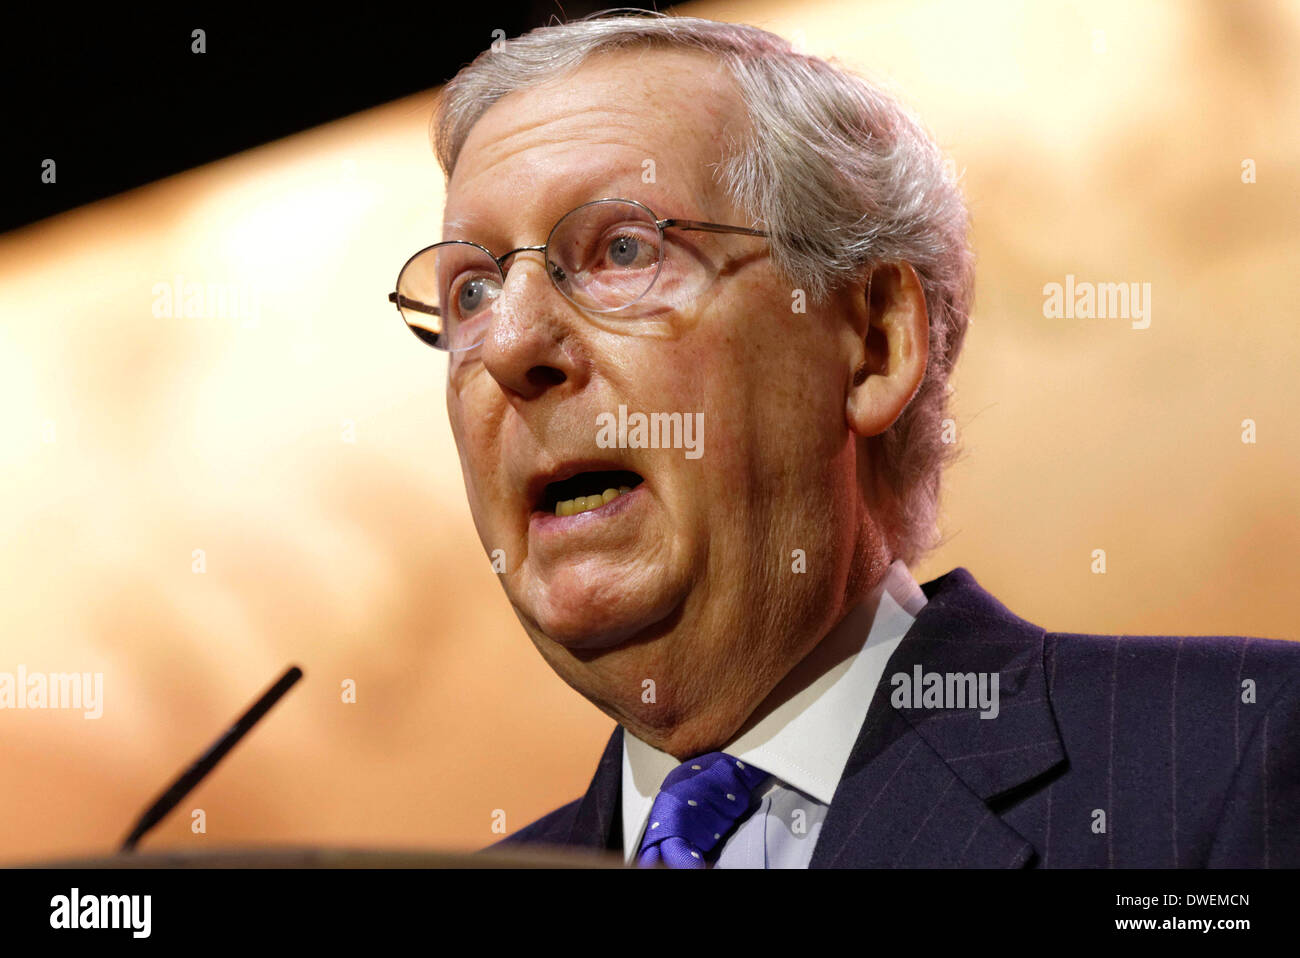 National Harbor, Maryland, USA. 6th March 2014. Republican senate minority leader Mitch McConnell of Kentucky speaks during an a Stock Photo